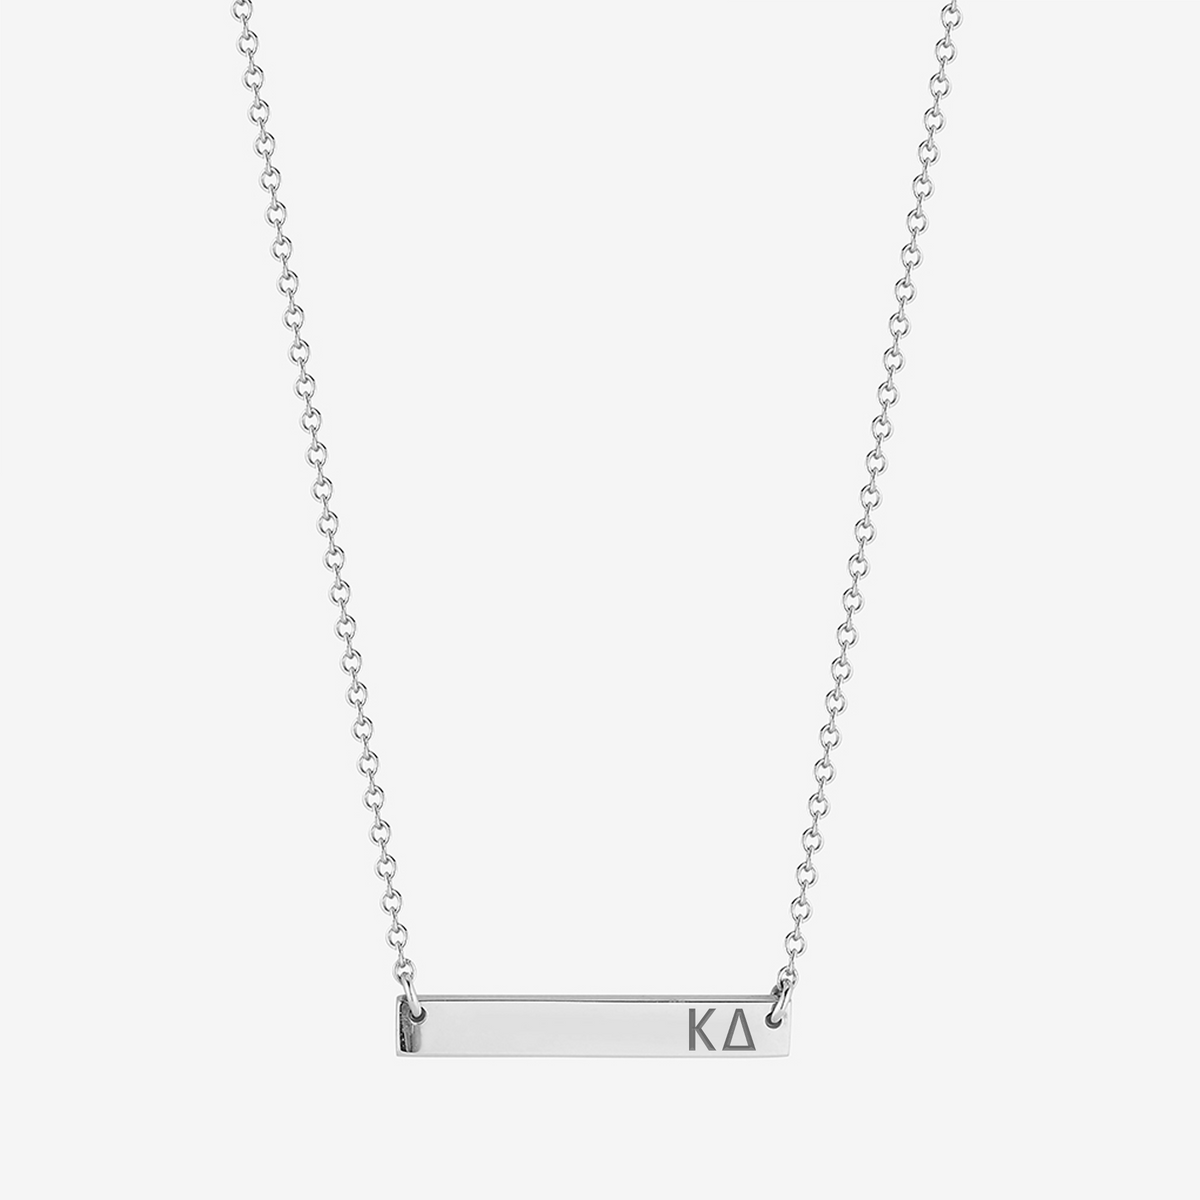 Kappa Delta Horizontal Bar Necklace in Sterling Silver